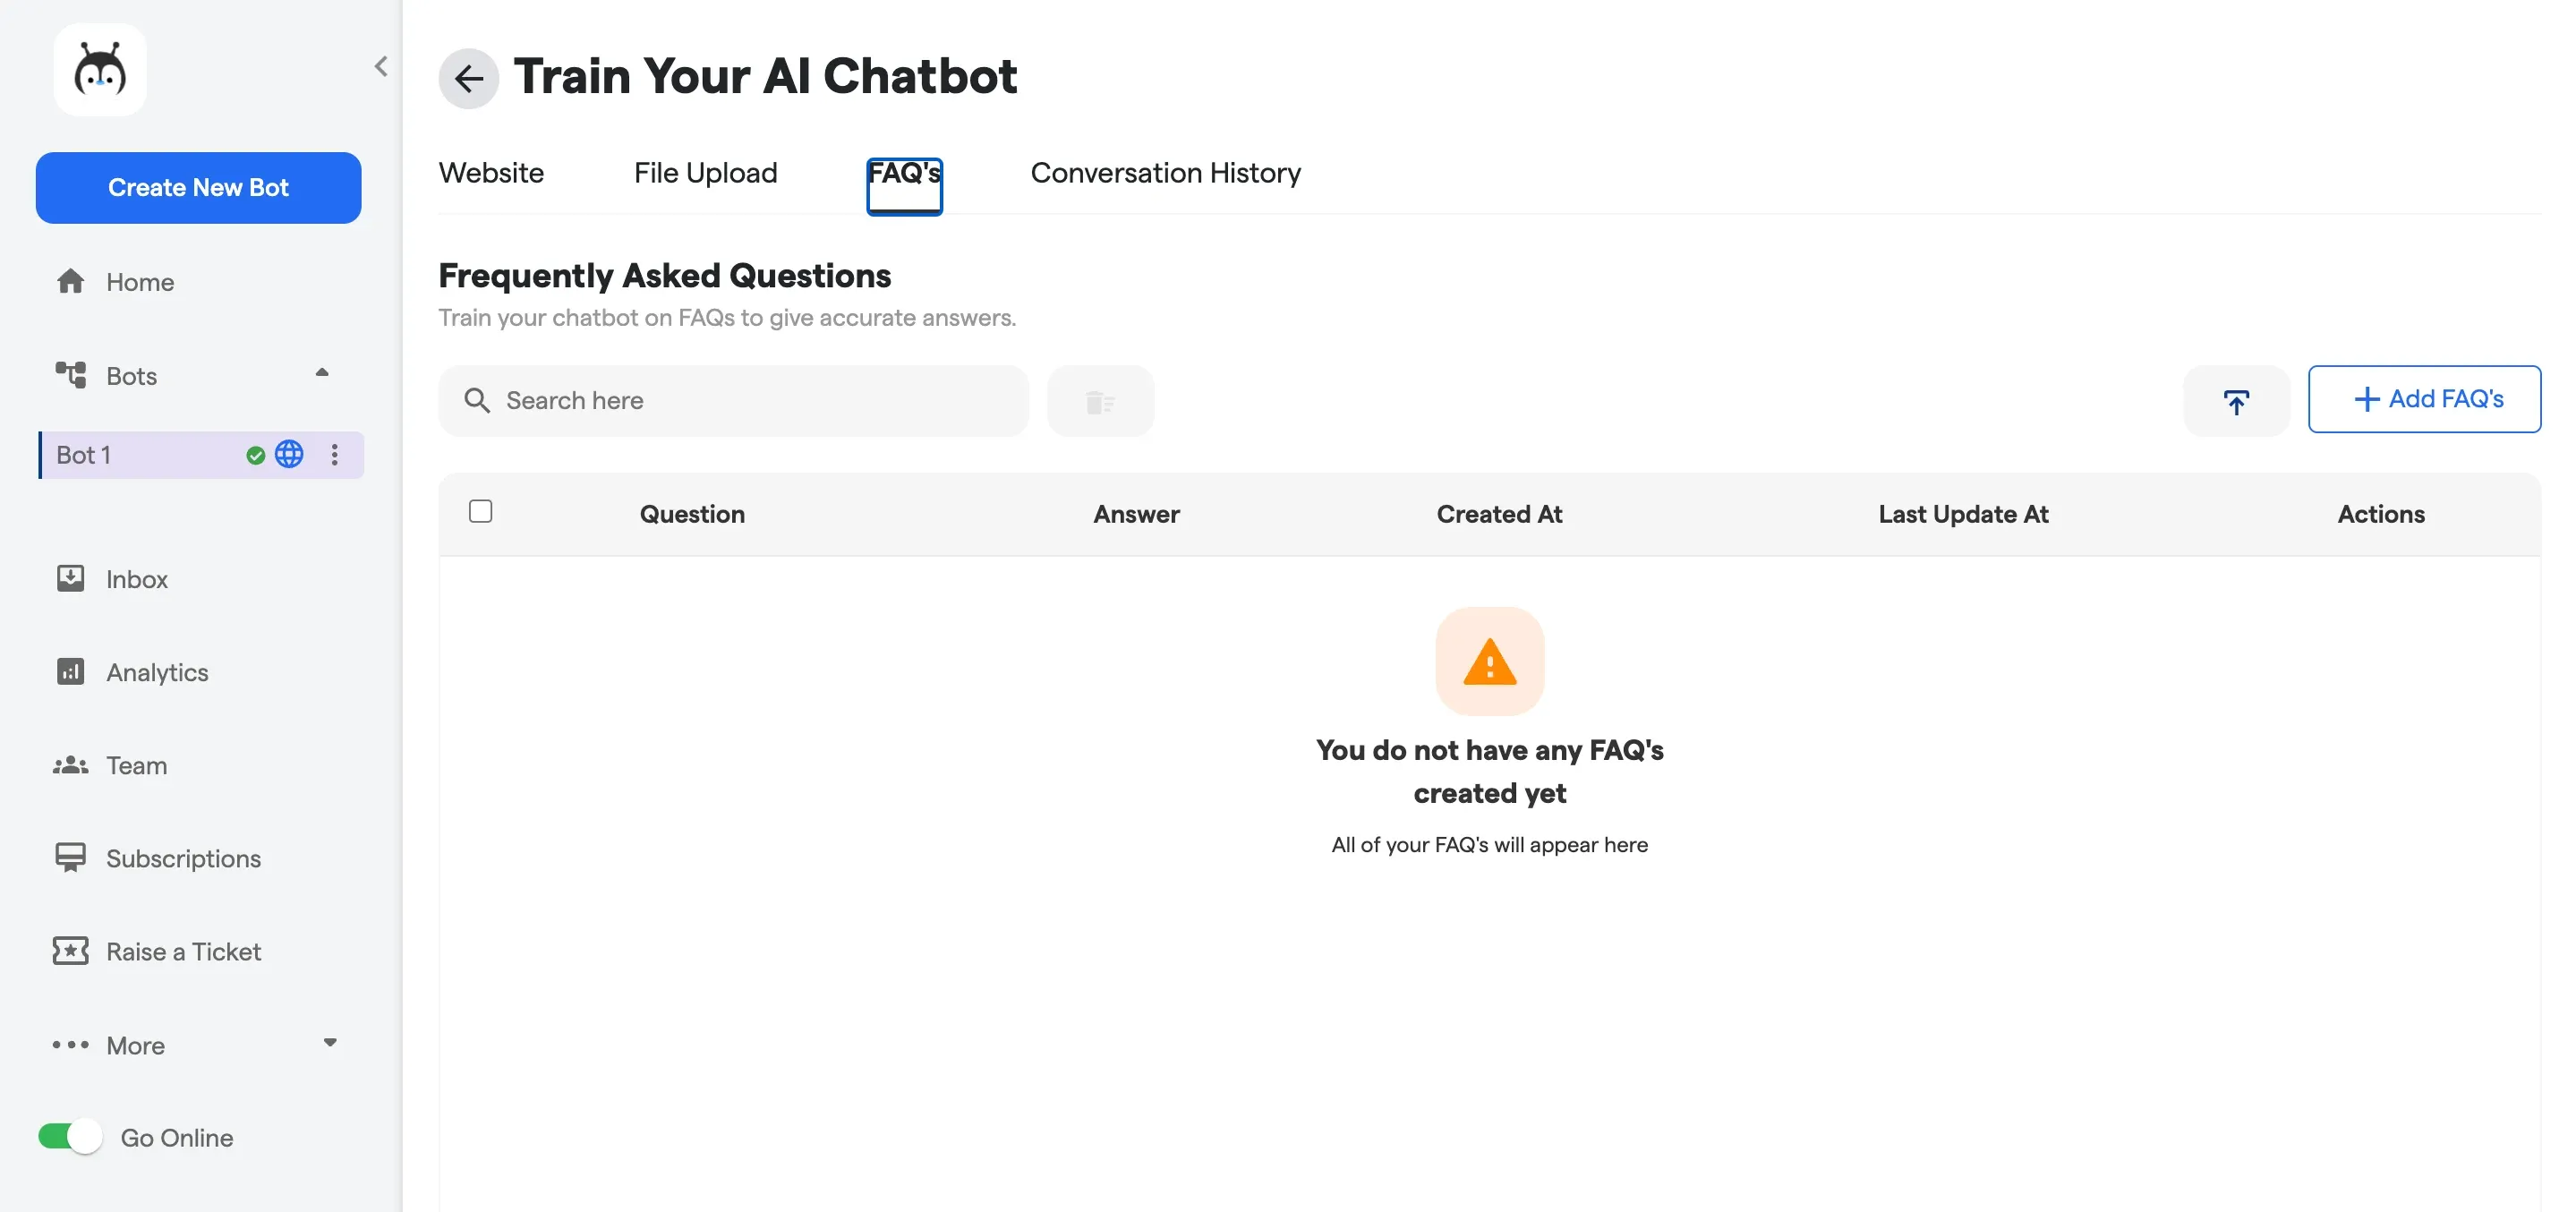 Train your chatbot for FAQs